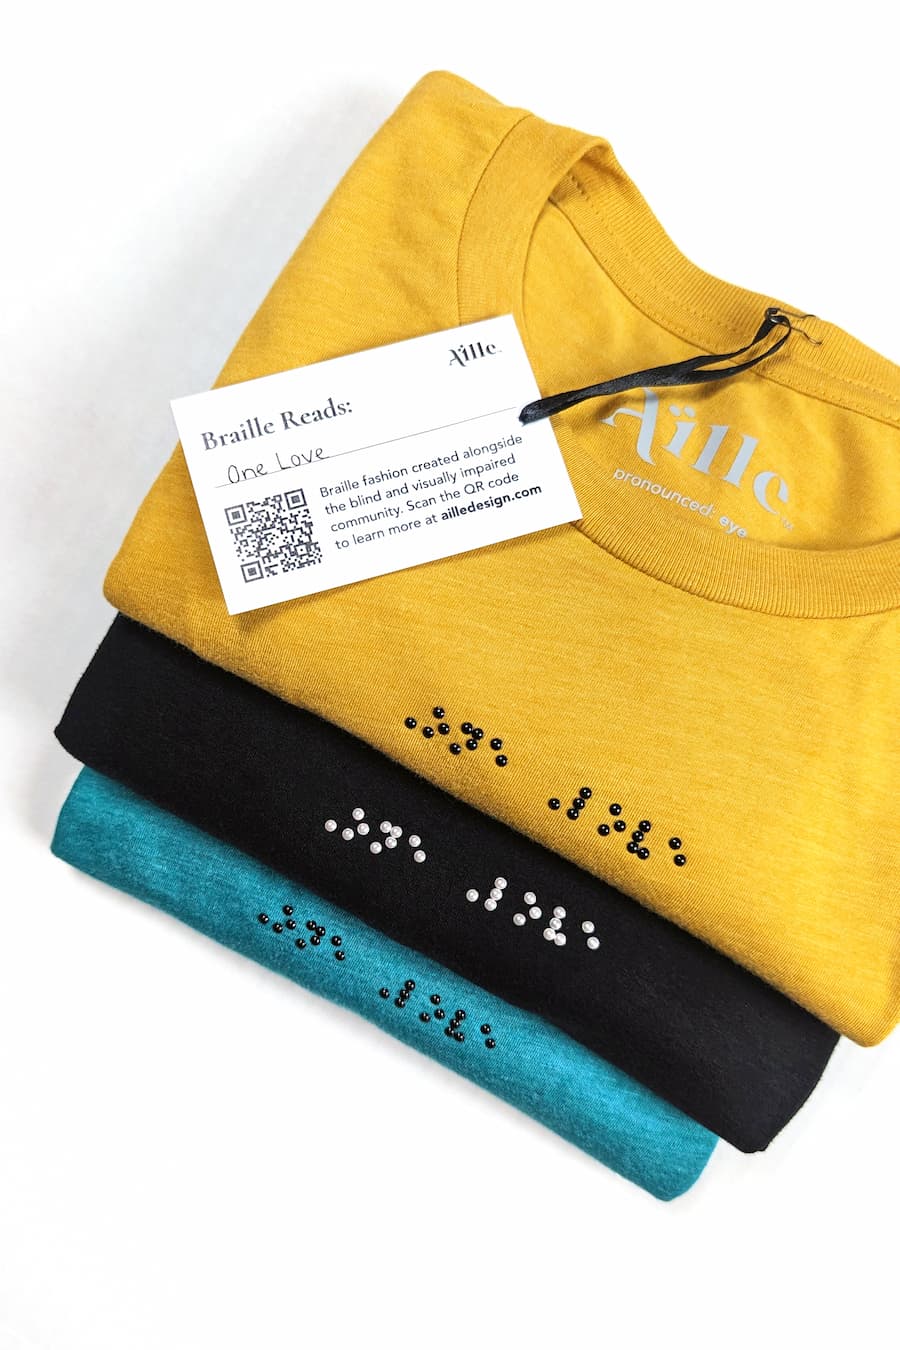 Close up of braille clothing: yellow shirt with black braille, black shirt with white braille, teal shirt with black braille